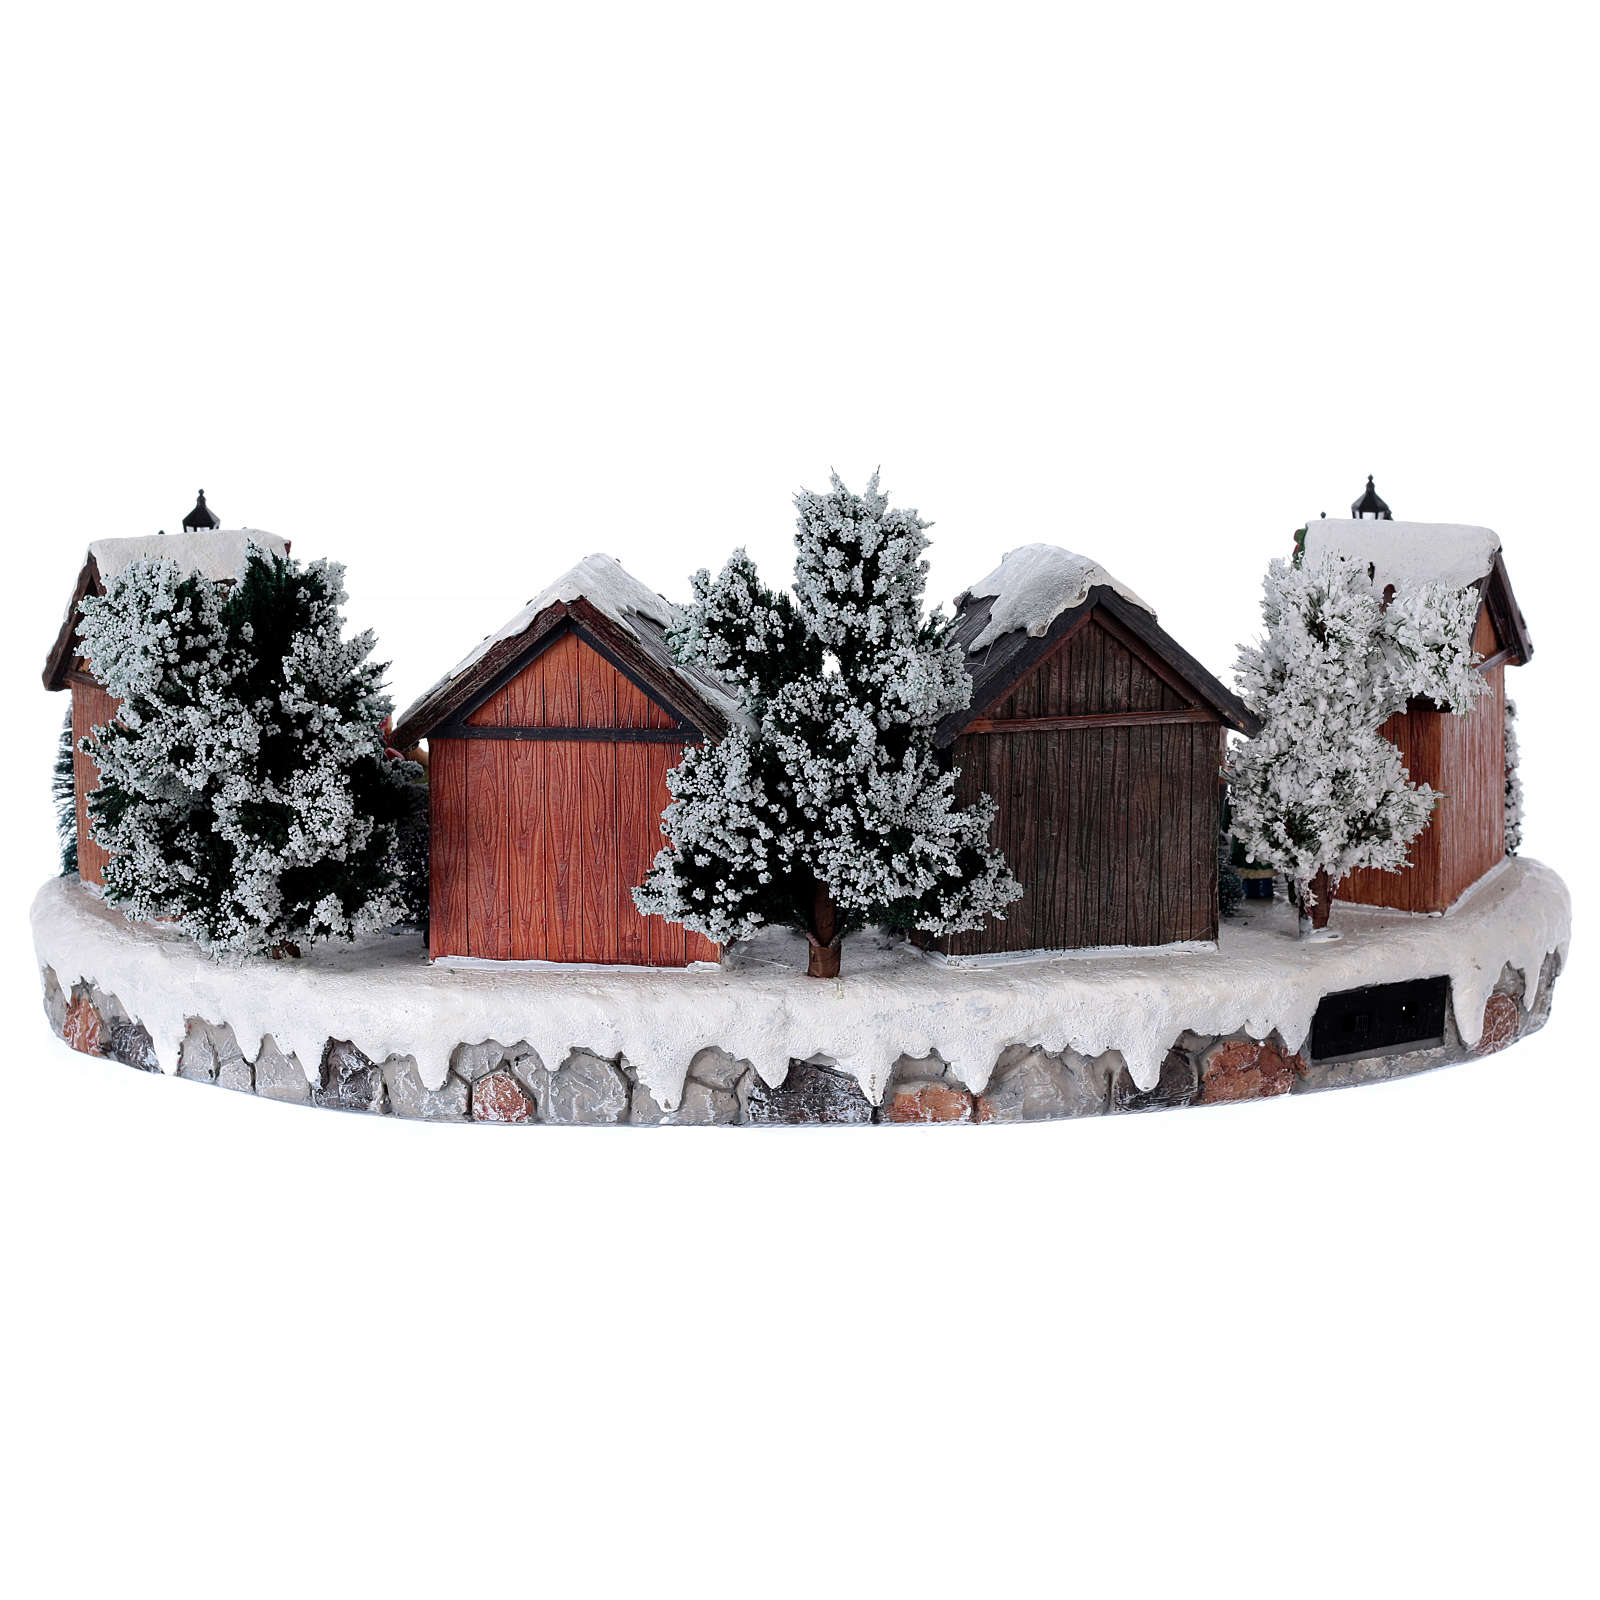 Christmas village with animated ice skaters and music | online sales on